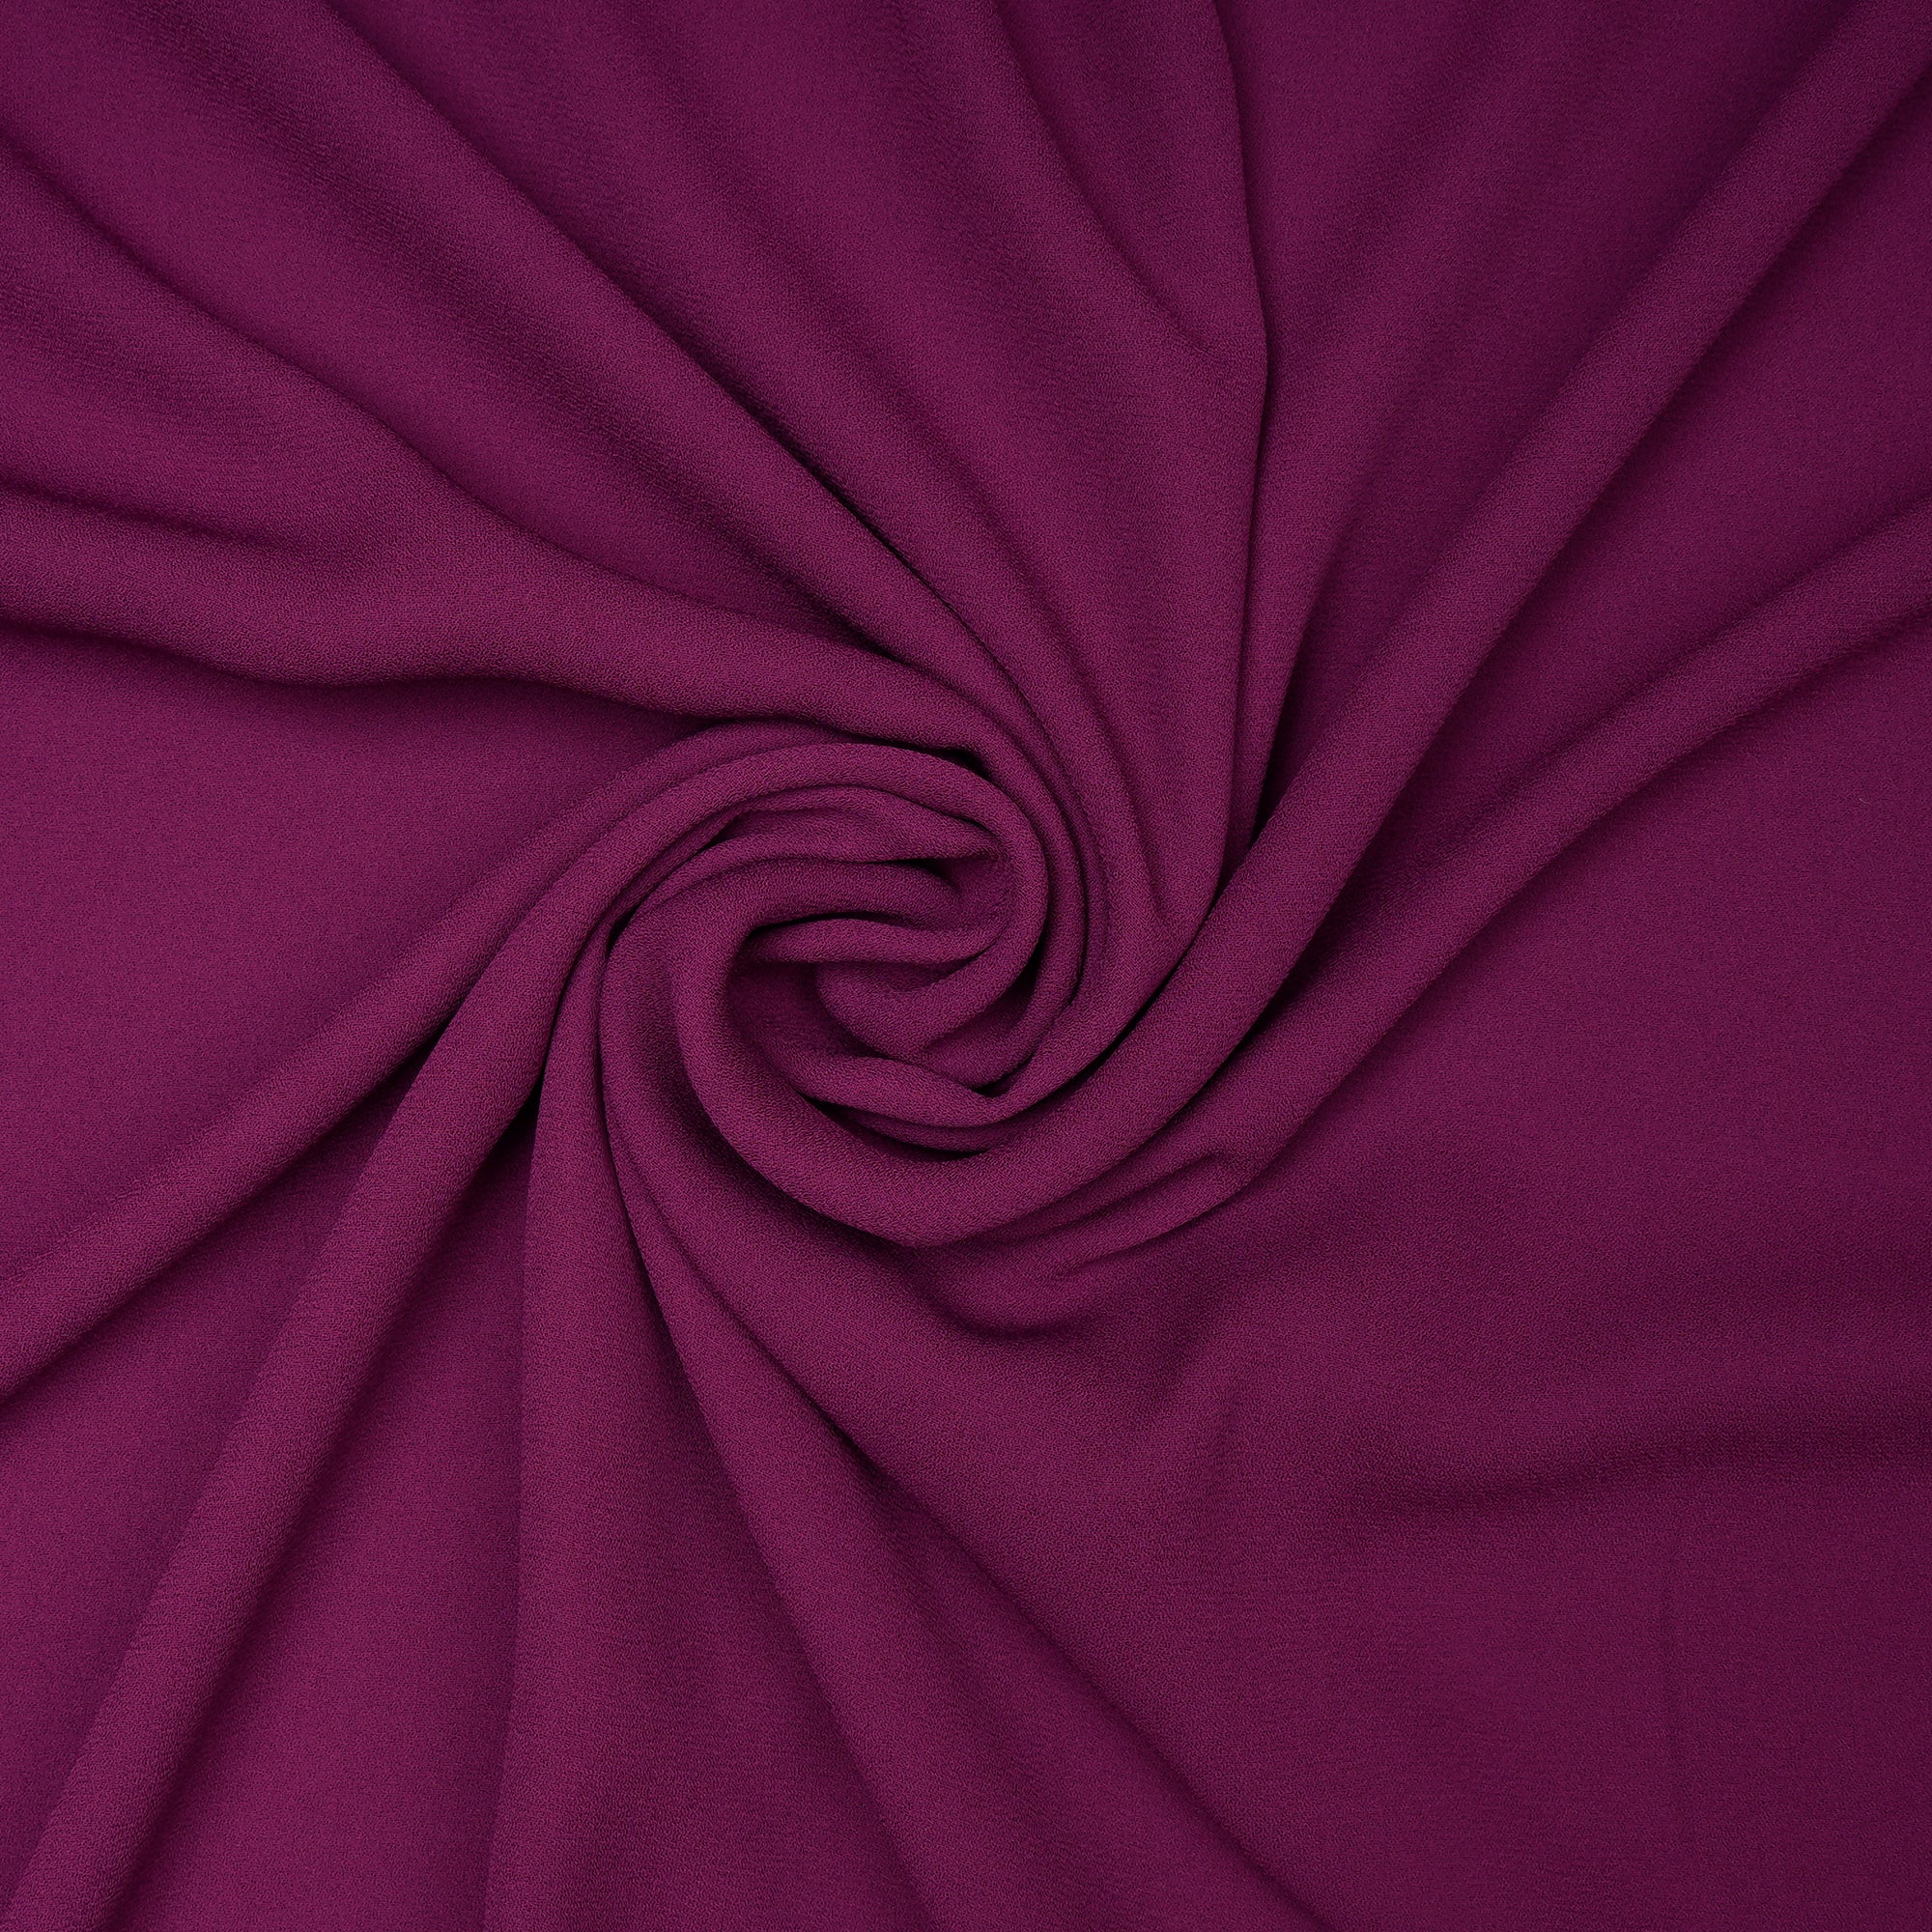 PurpleWine Solid Dyed Imported Royal Georgette Fabric (60" Width)